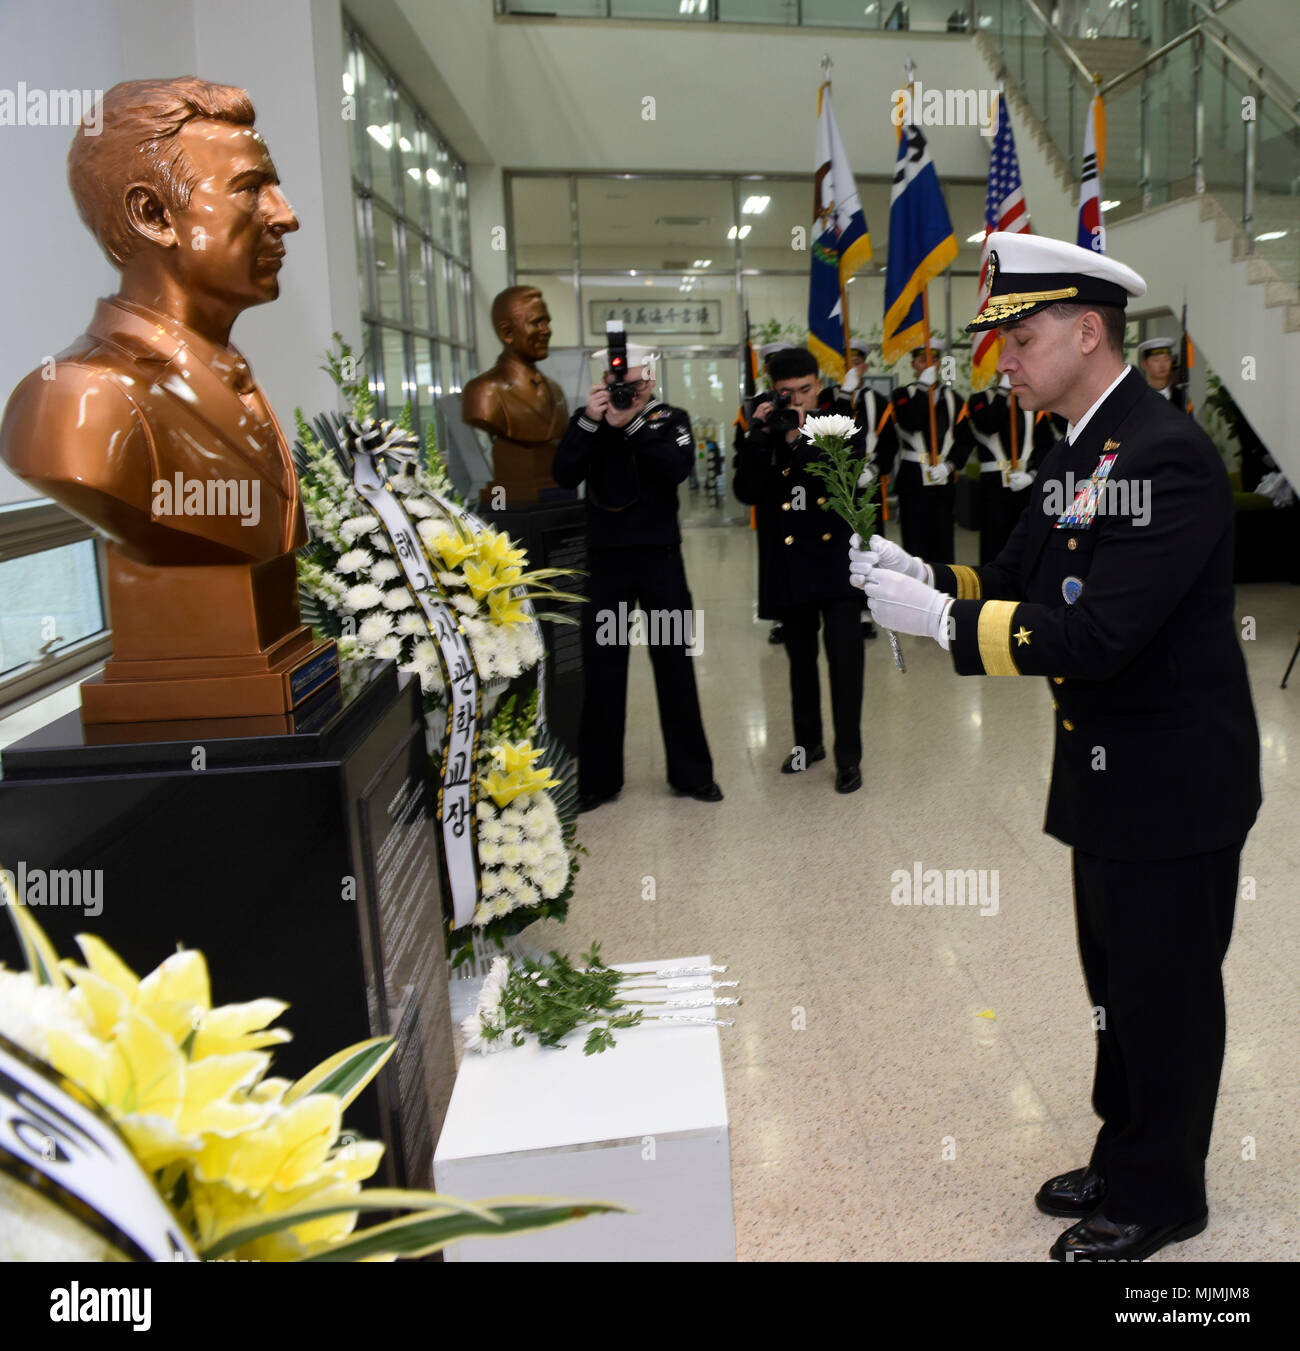 171207-N-TB148-074 CHINHAE, Republic of Korea (Dec. 07, 2017) Rear Adm. Brad Cooper, commander, U.S. Naval Forces Korea (CNFK), attends the unveiling of the Capt. Michael Lousey memorial bust unveiling ceremony at Republic of Korea (ROK) Naval Academy in Chinhae. CNFK is the U.S. Navy’s representative in the ROK, providing leadership and expertise in naval matters to improve institutional and operational effectiveness between the two navies and to strengthen collective security efforts in Korea and the region. (U.S. Navy photo by Mass Communication Specialist Seaman William Carlisle) Stock Photo